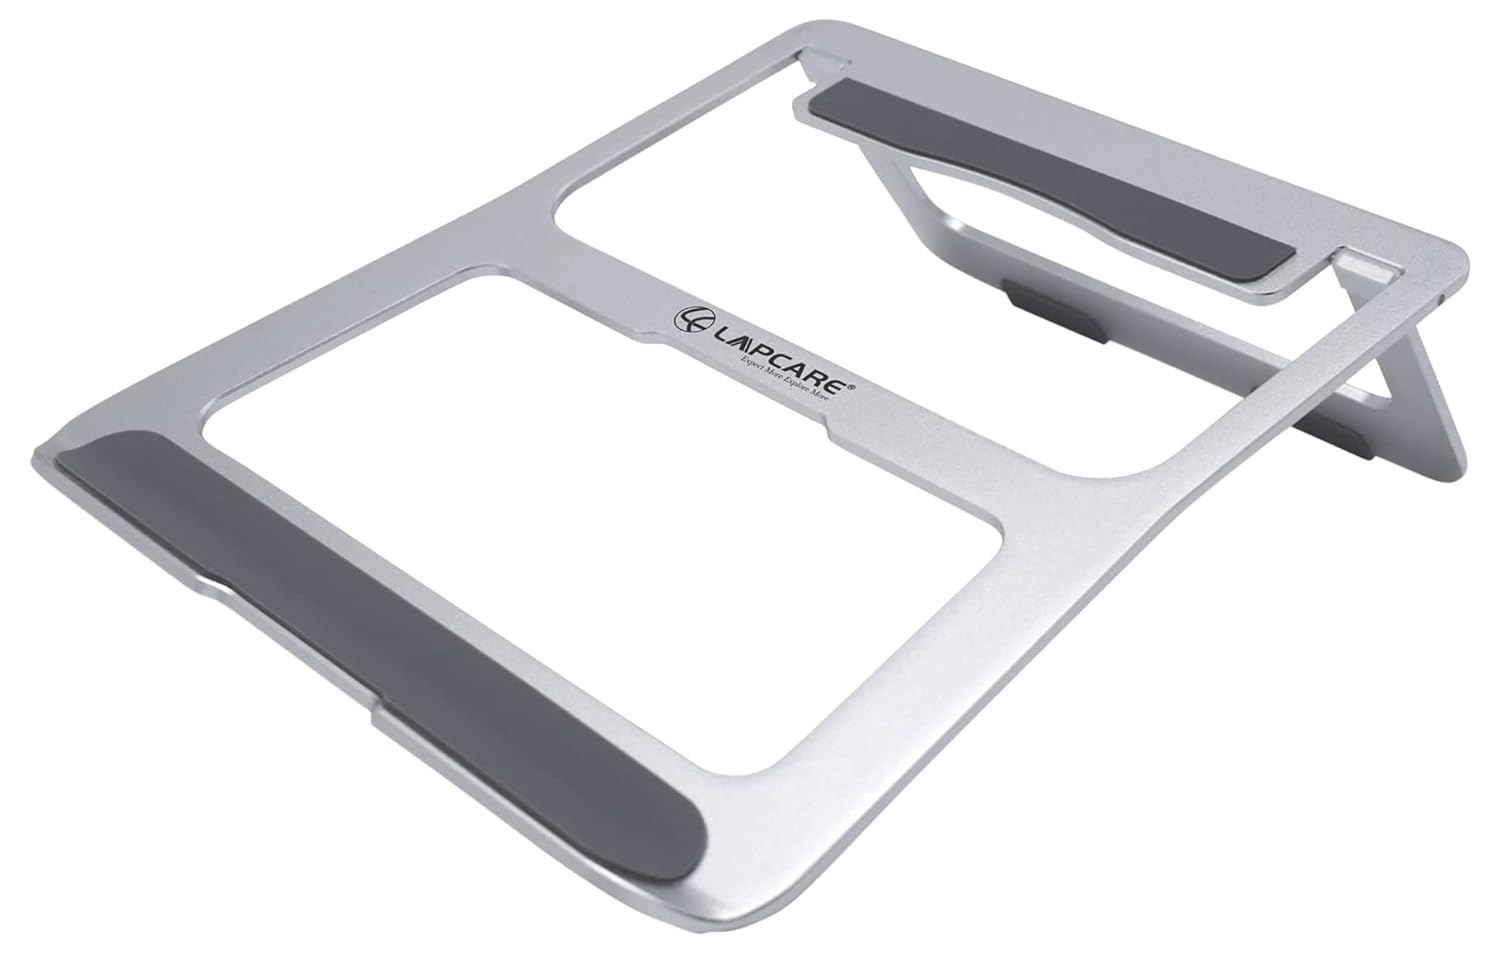 LAPCARE LAPBUDDY Foldable Laptop Stand for Laptops up to 15.6